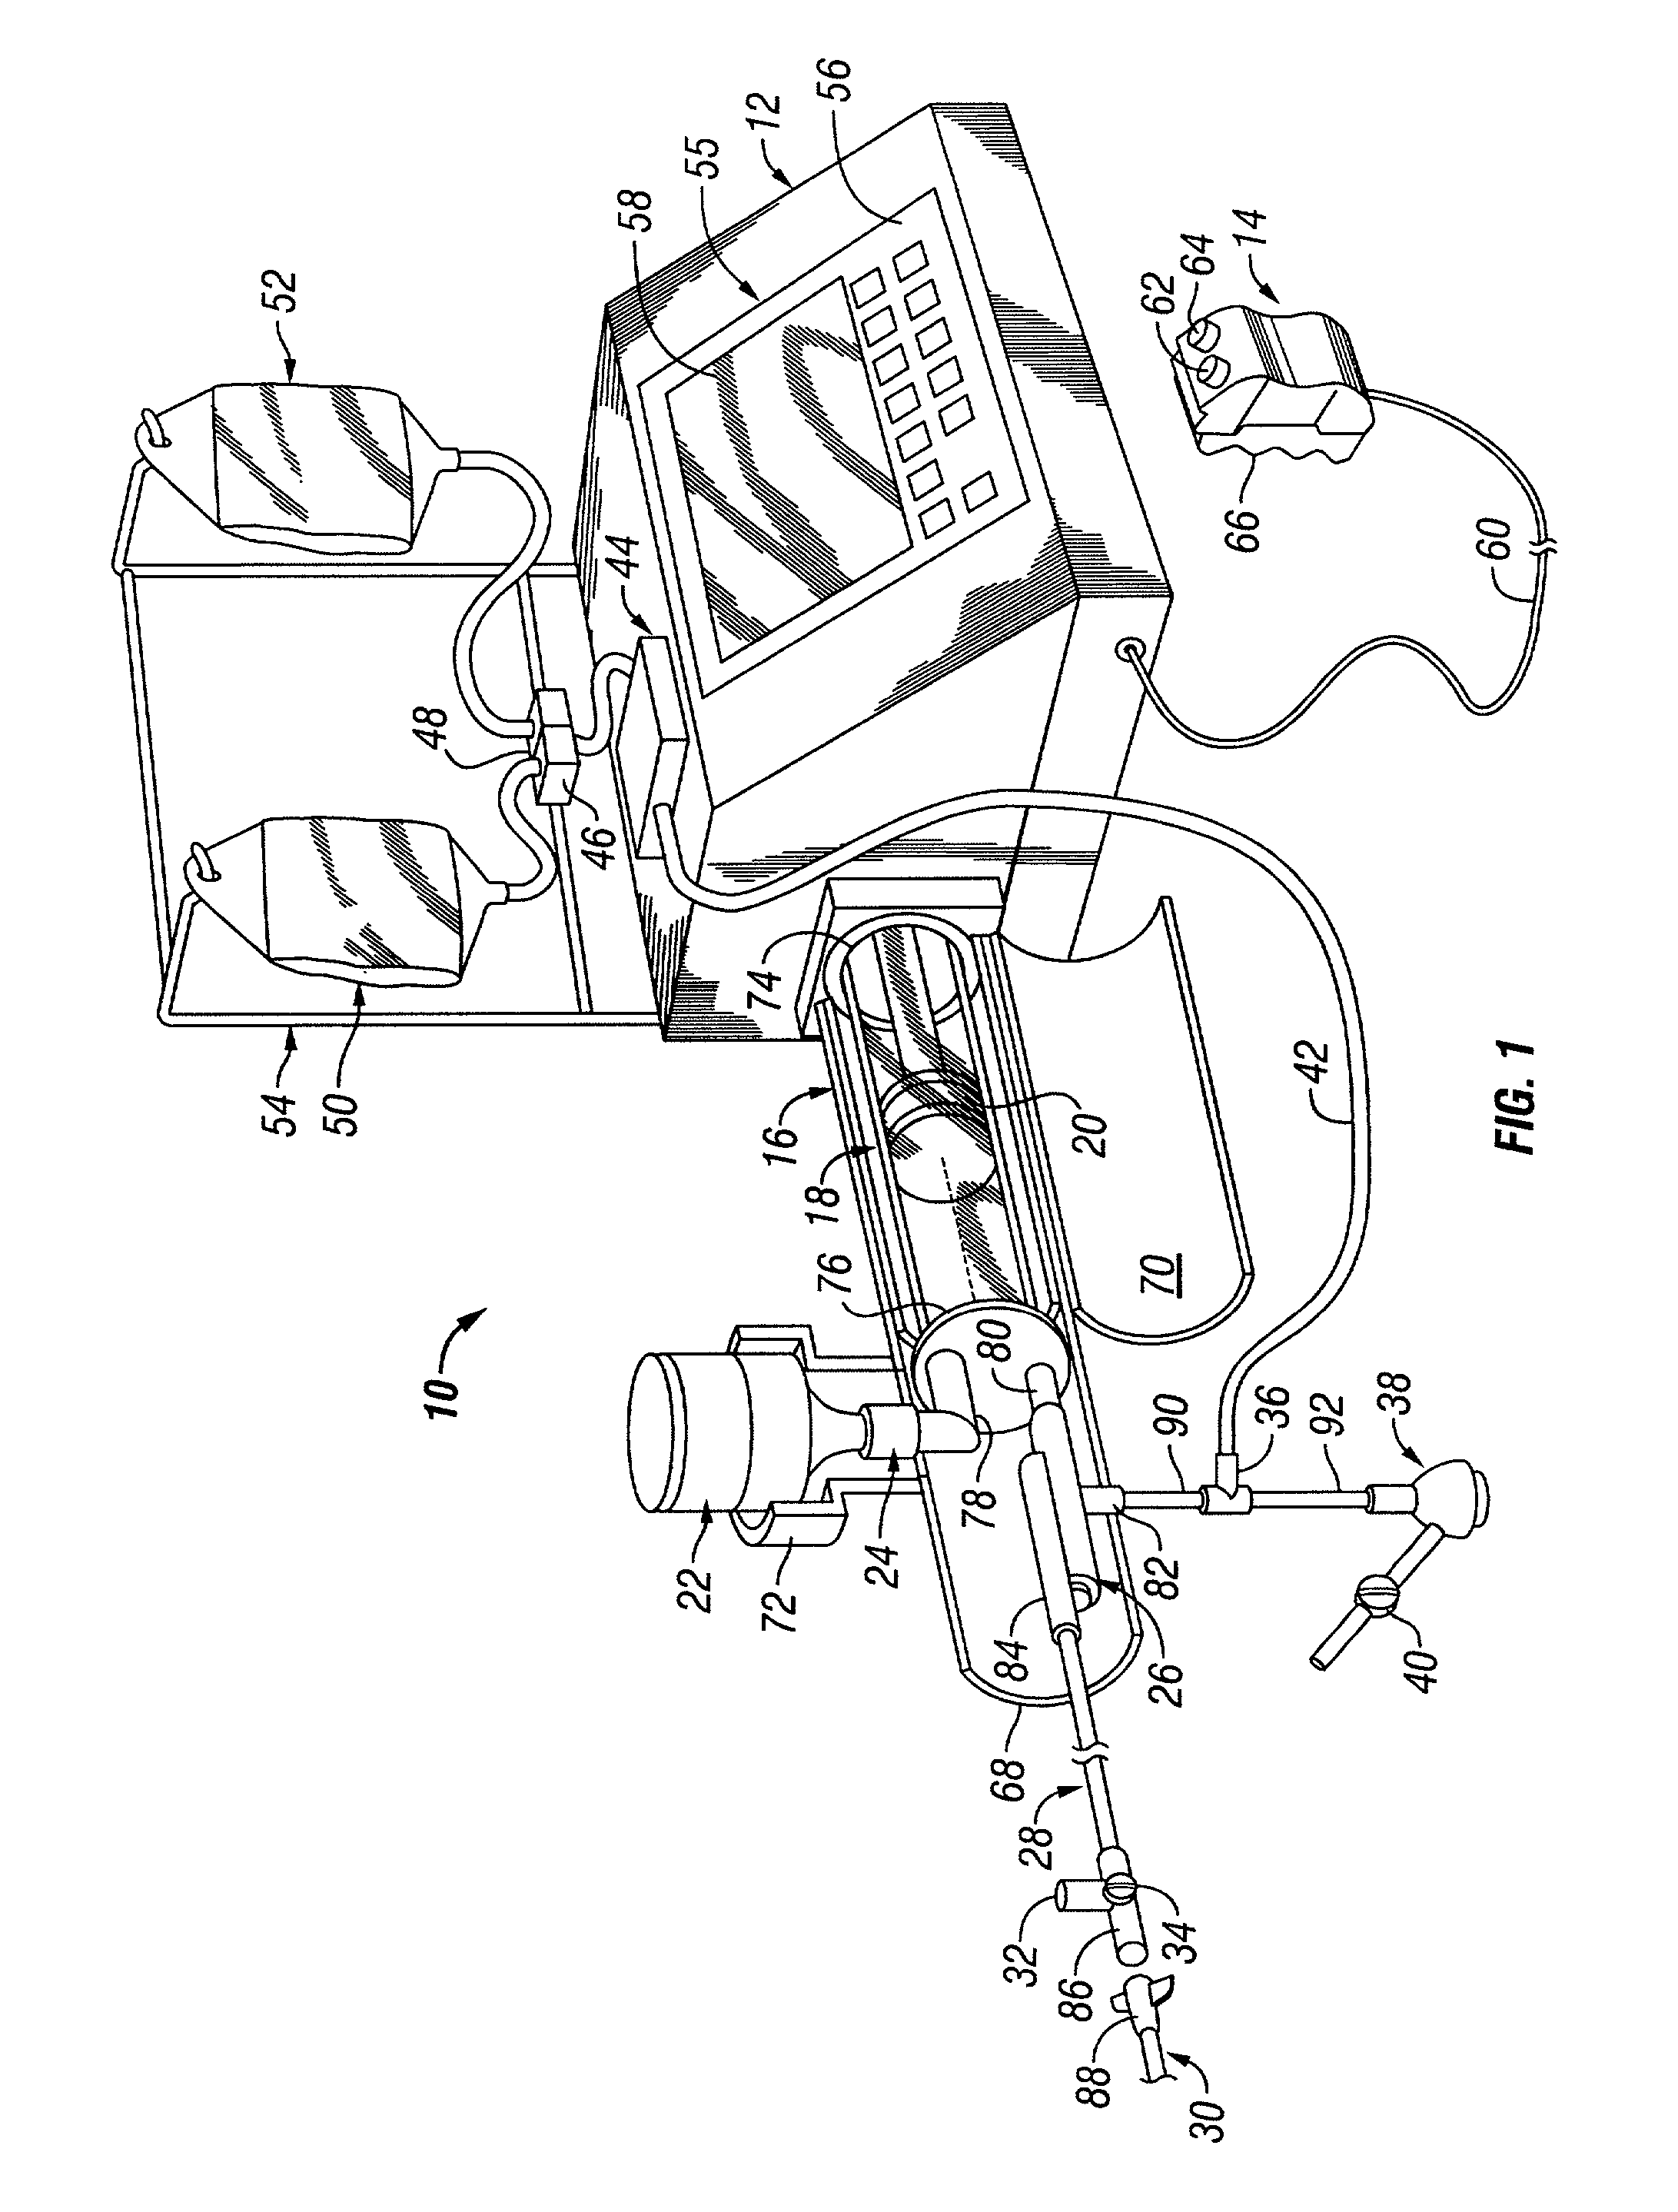 Angiographic injector system and method of use